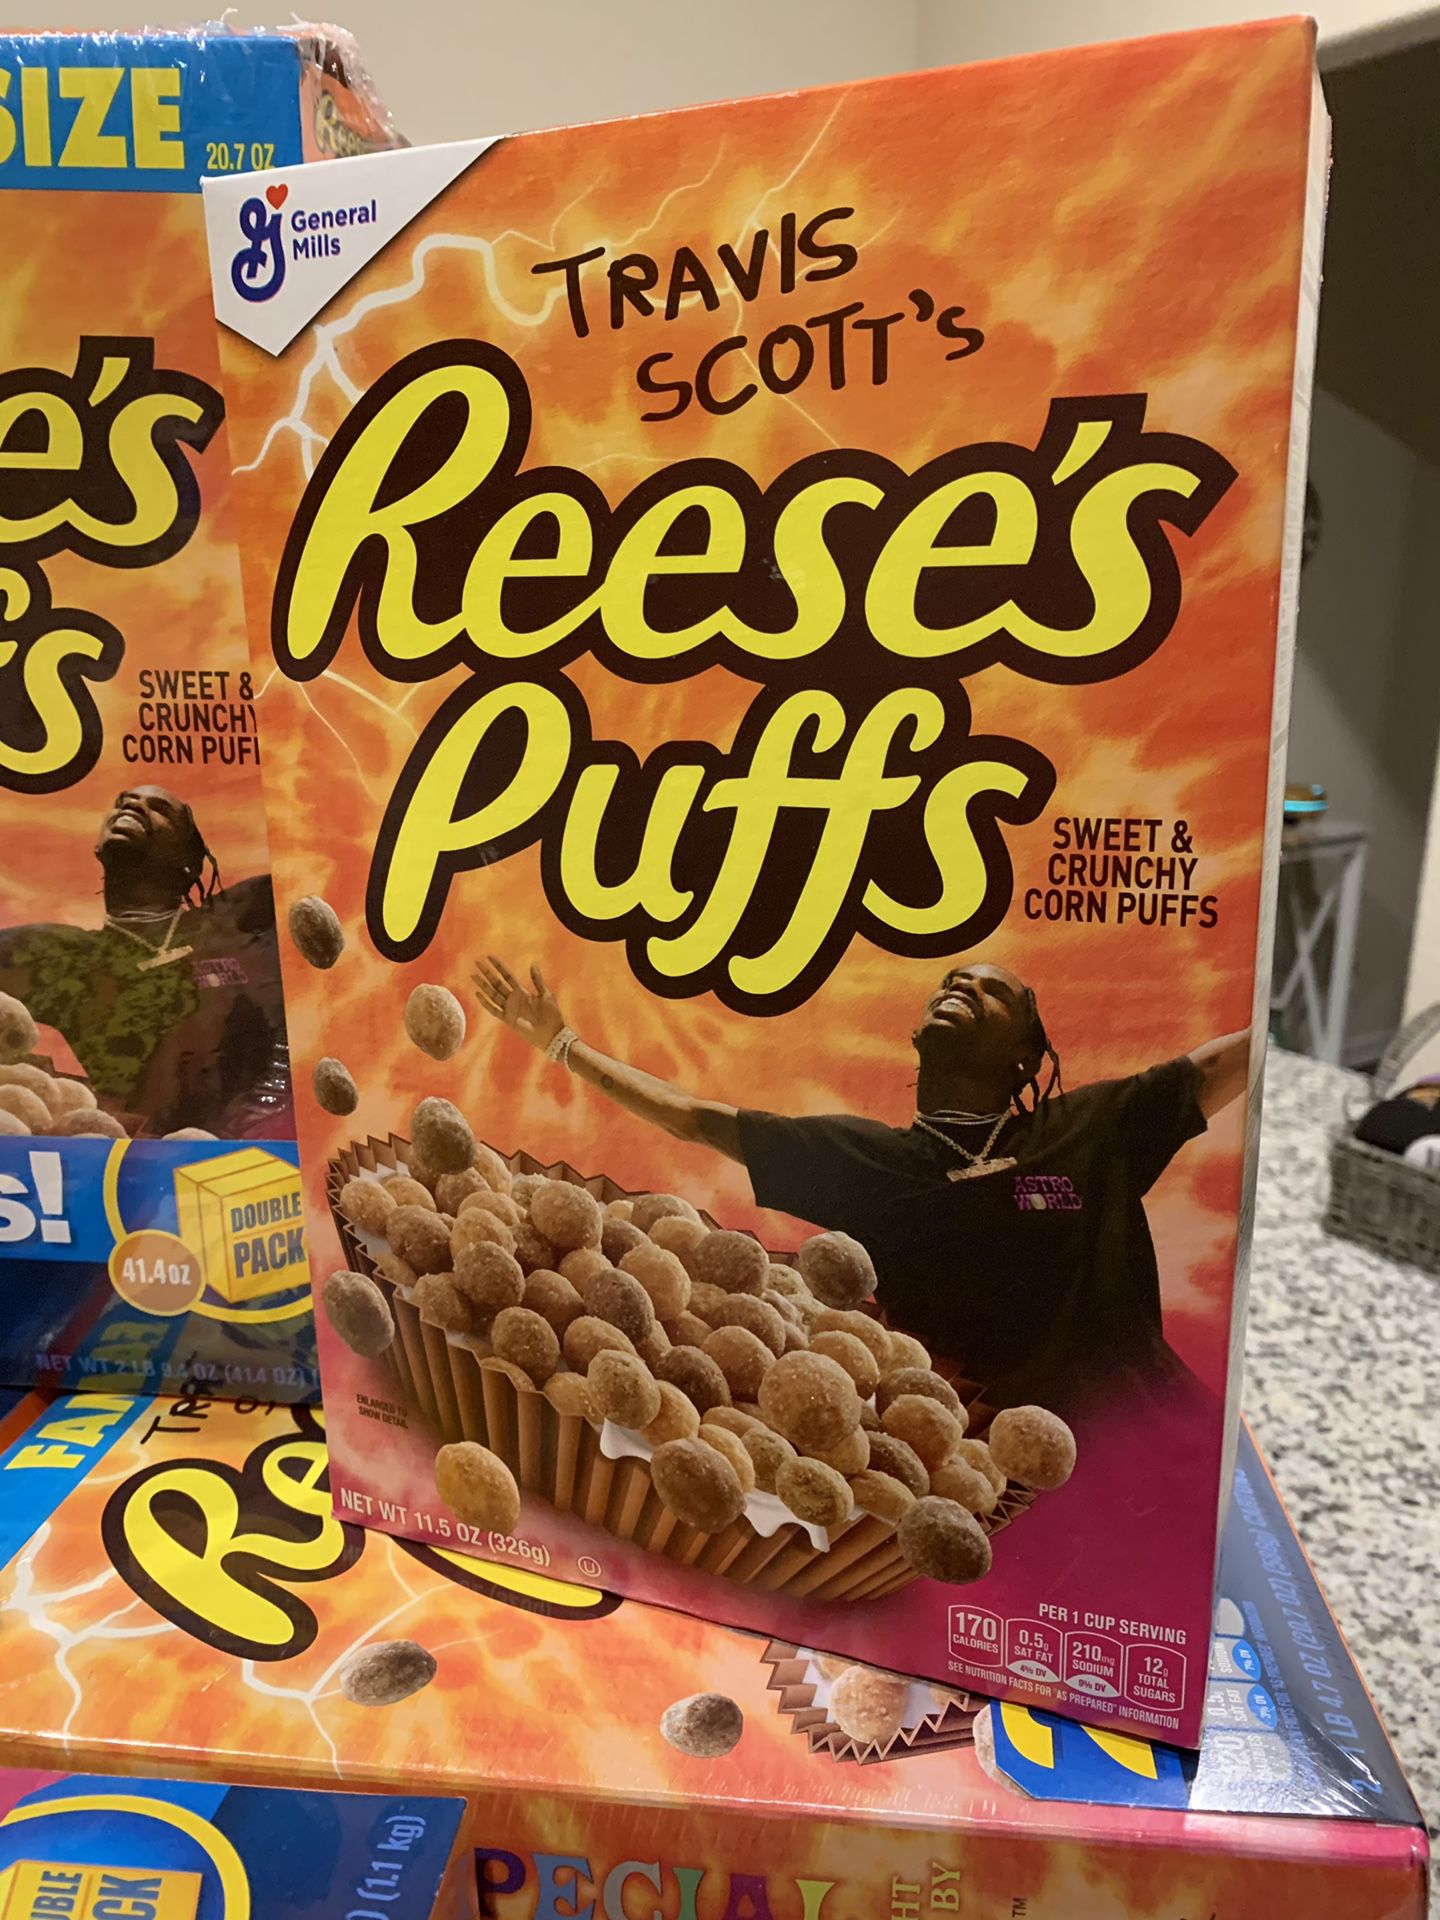 Travis Scott Reese’s Puffs regular and Family pack